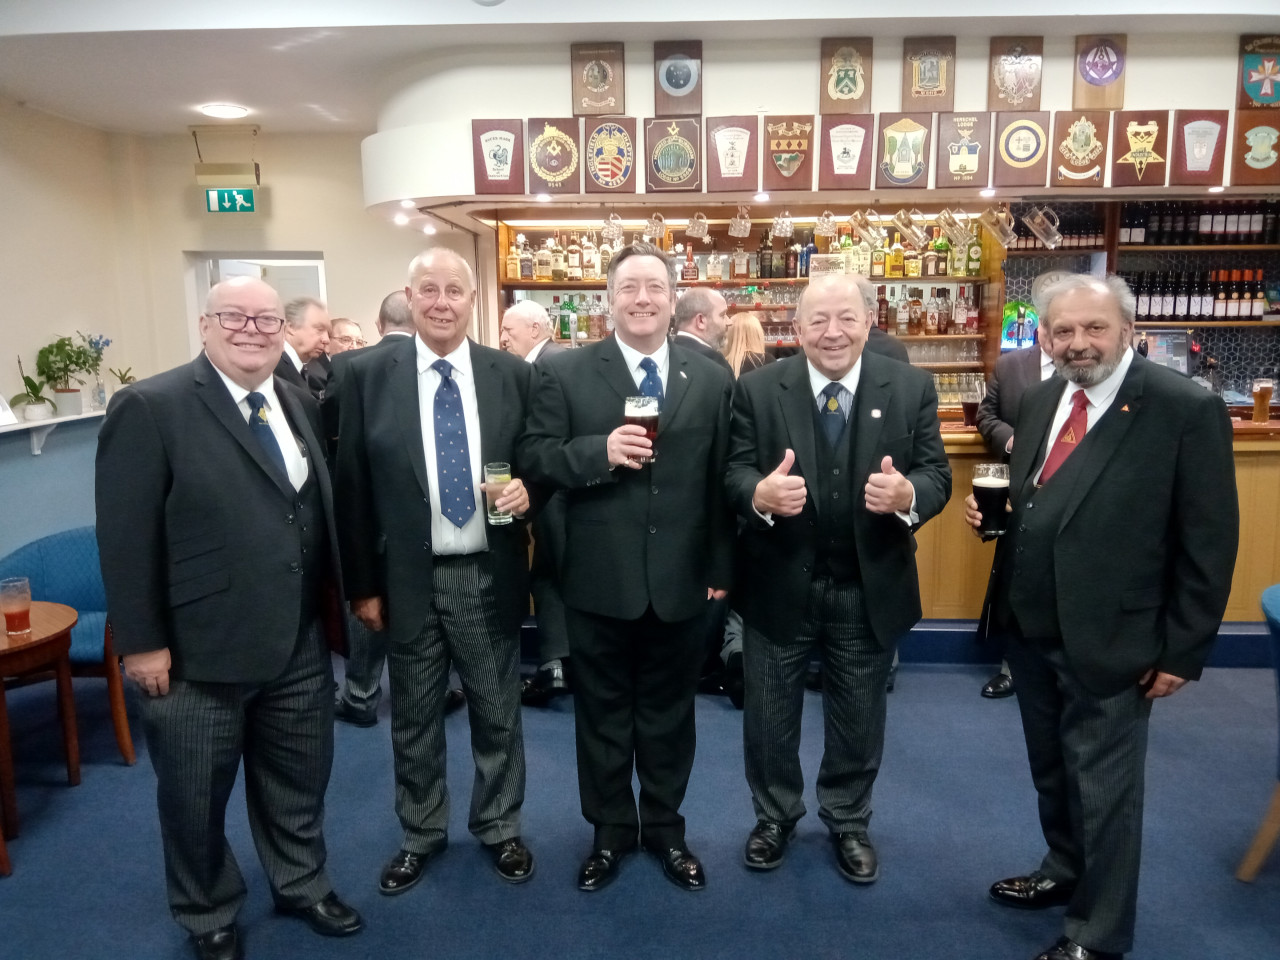 Friday the 13th Lucky for Wexham Park Chapter